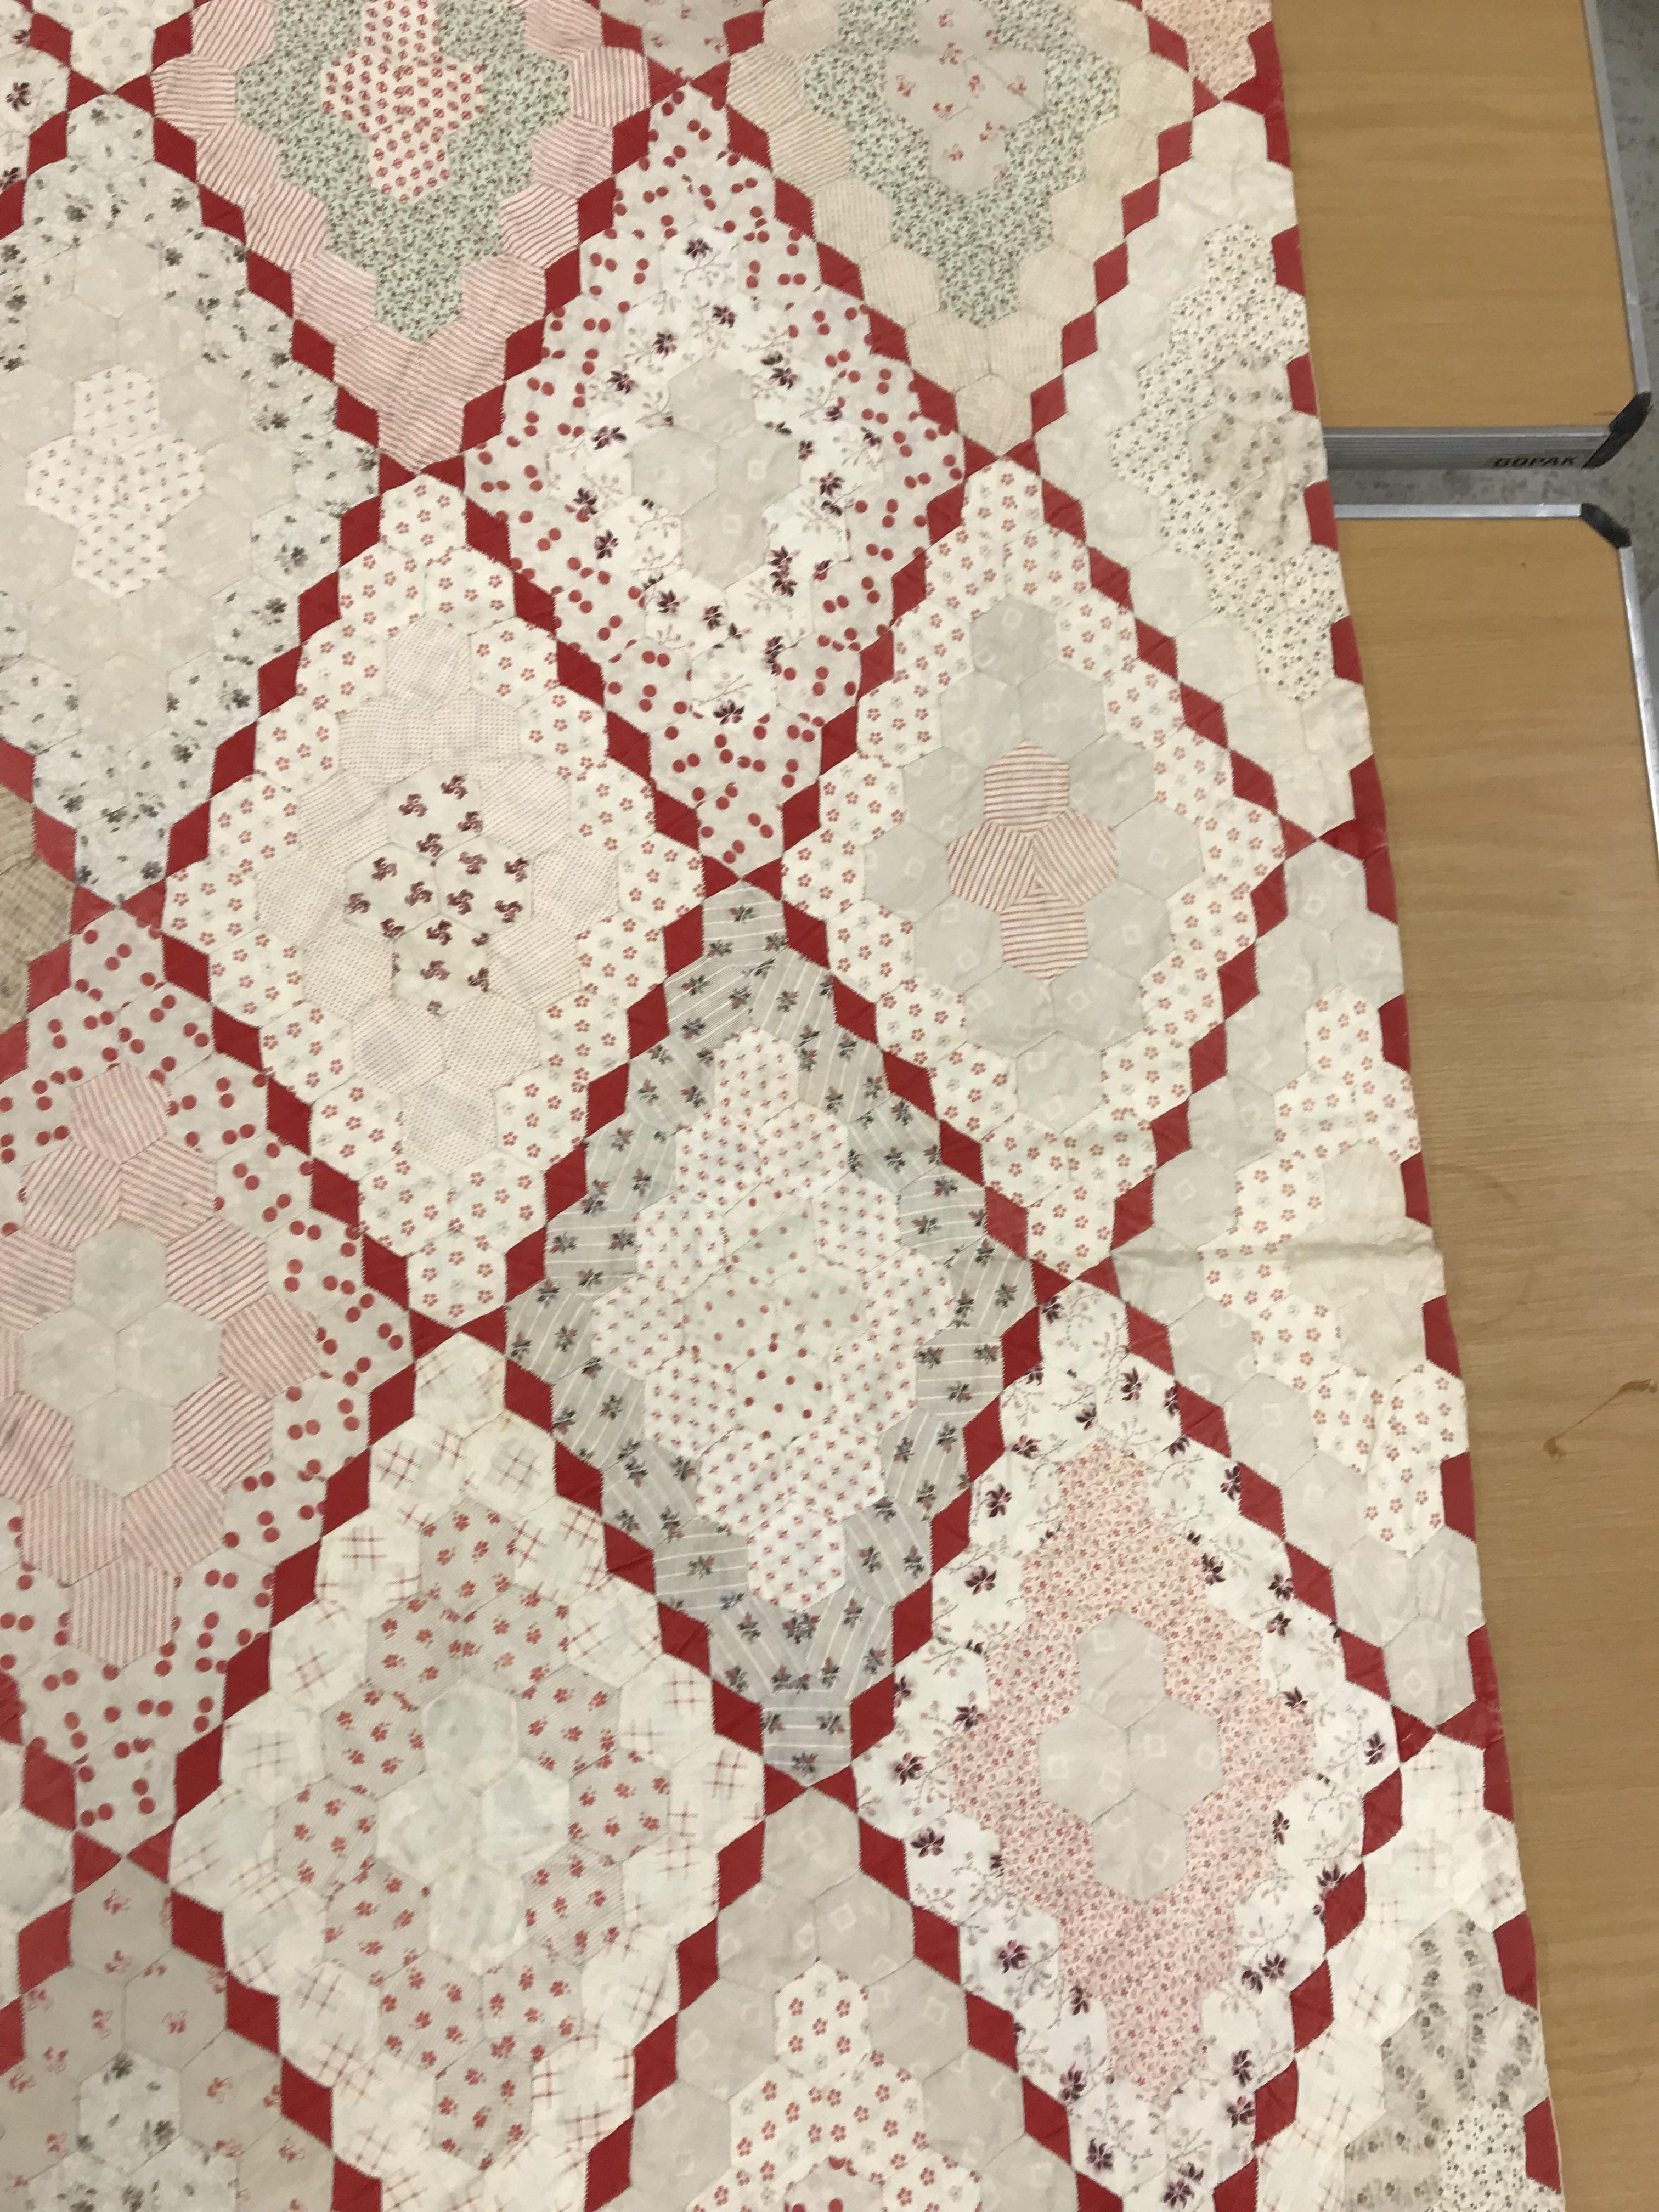 An early 20th Century hand-stitched, pieced quilt, backed with plain fabric and no wadding, - Image 13 of 36